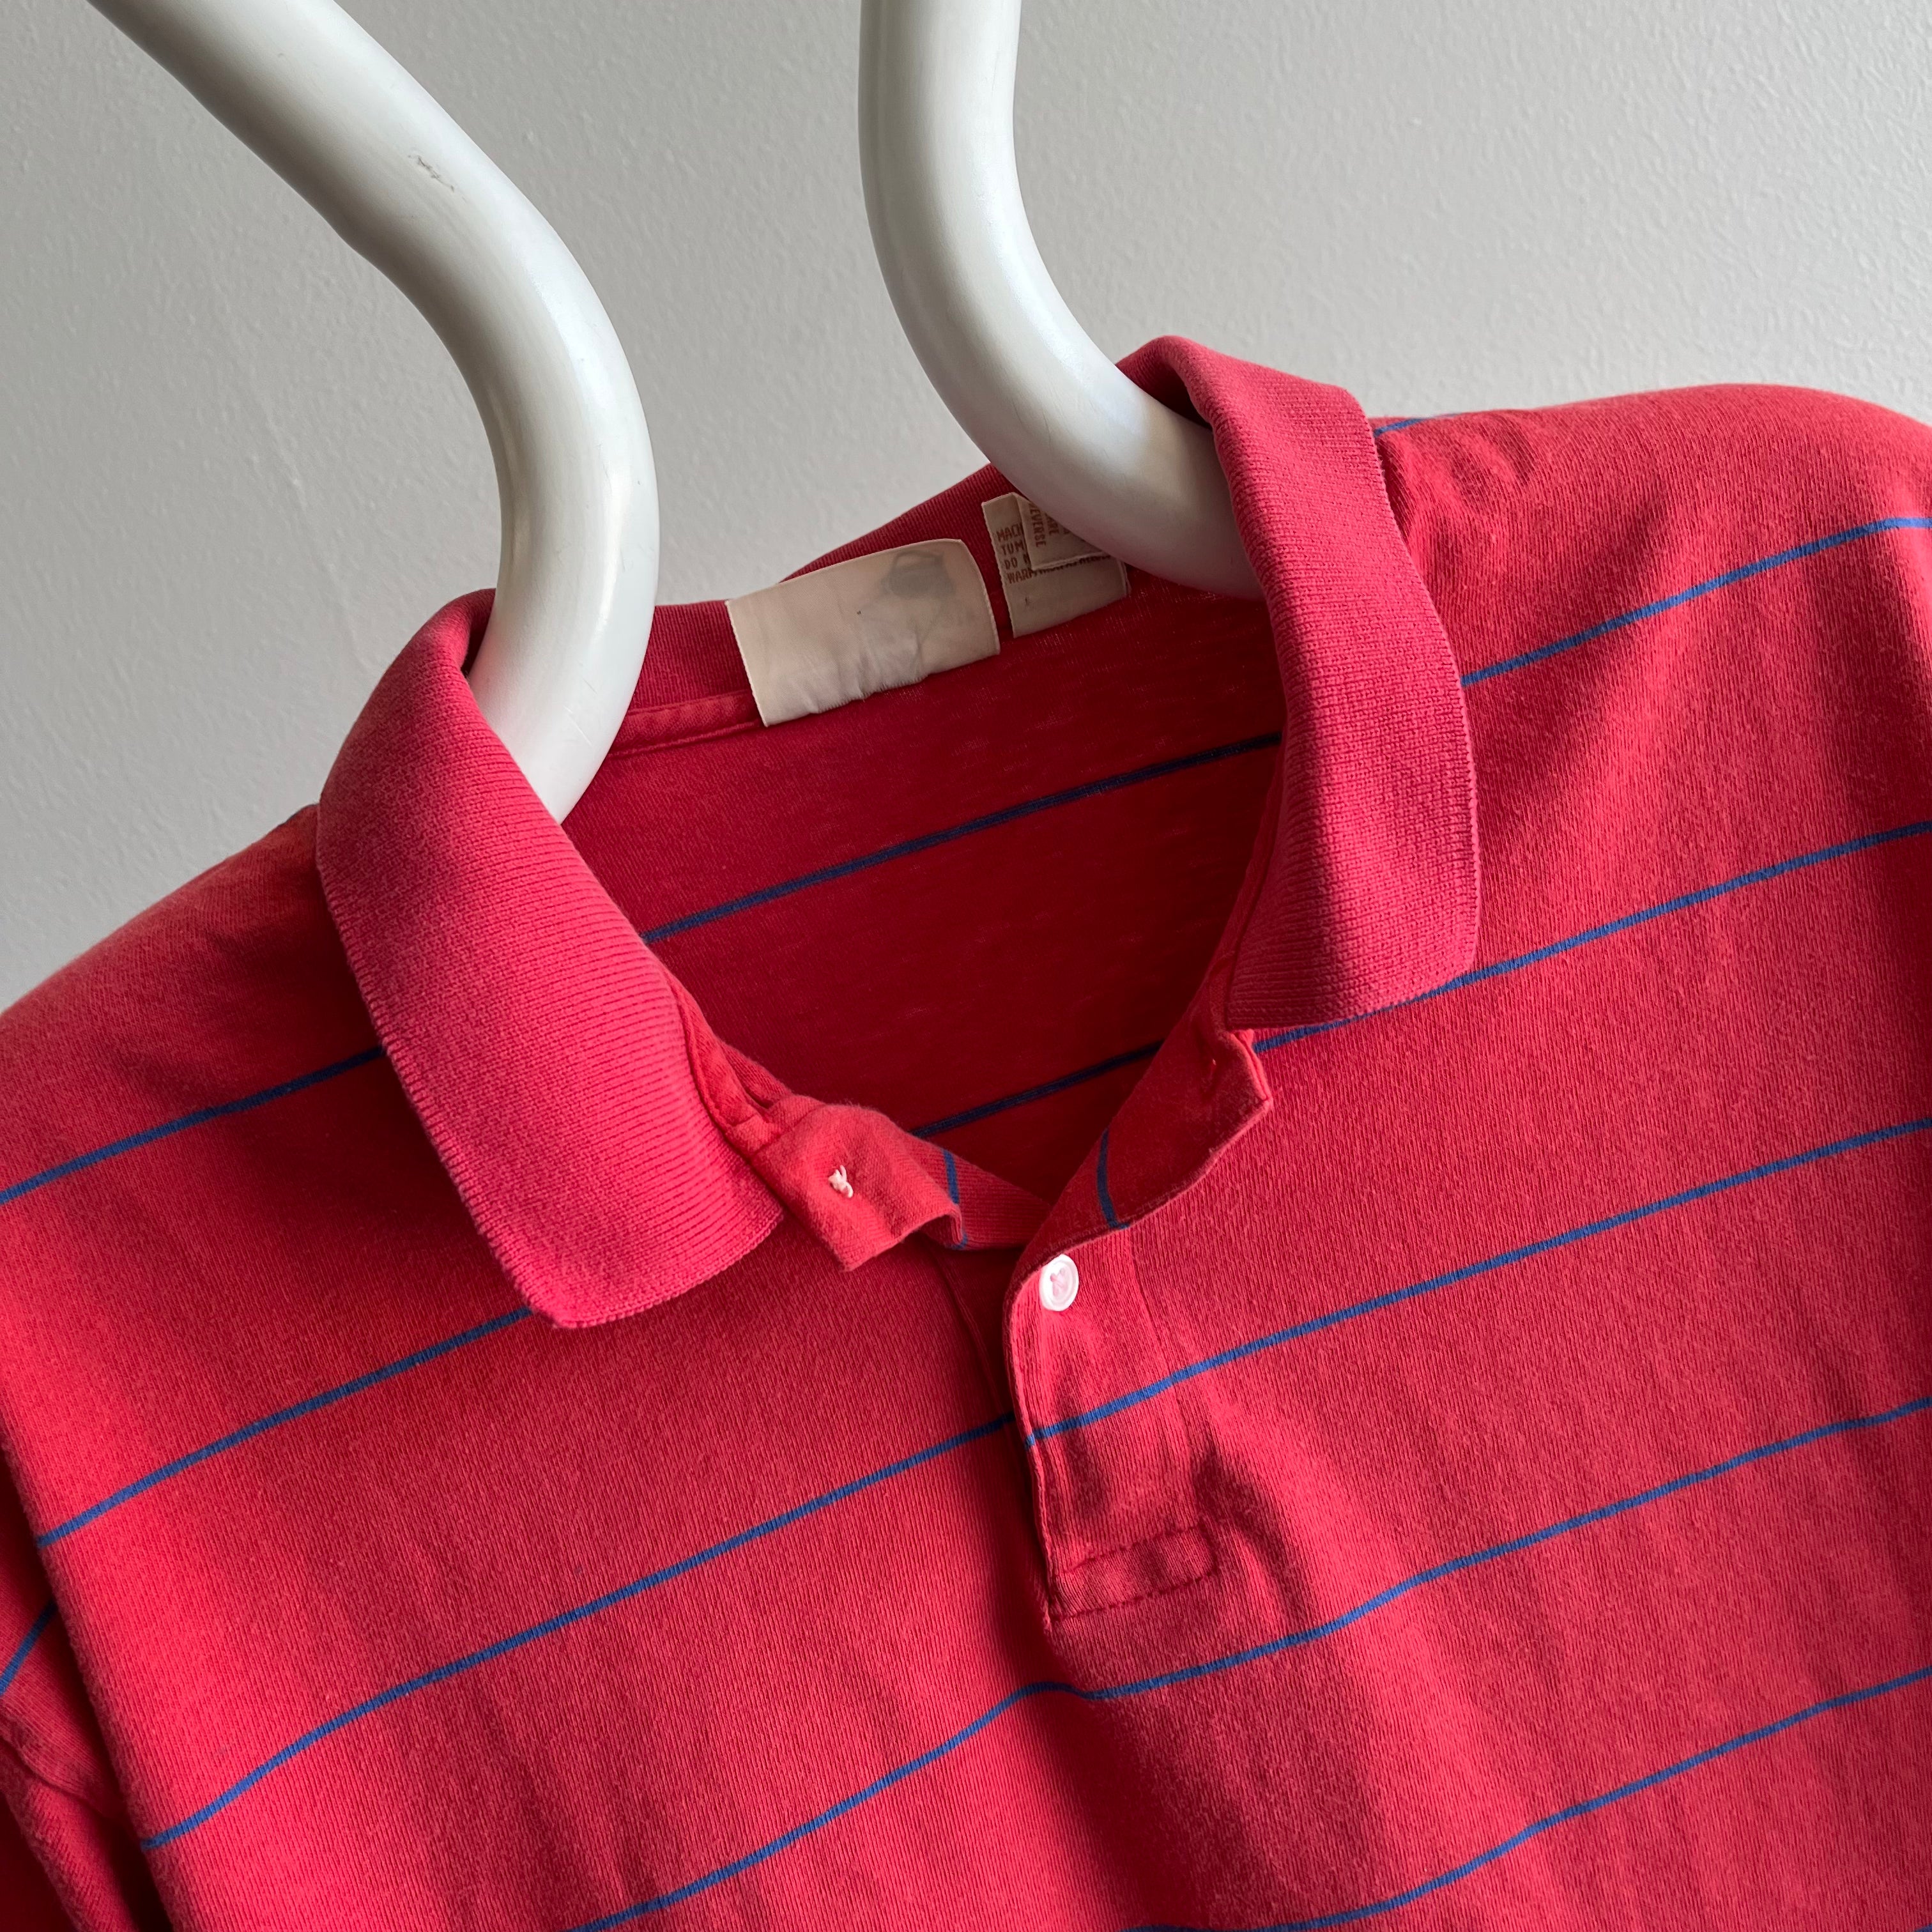 1980s Faded Striped Red and Blue Polo Shirt